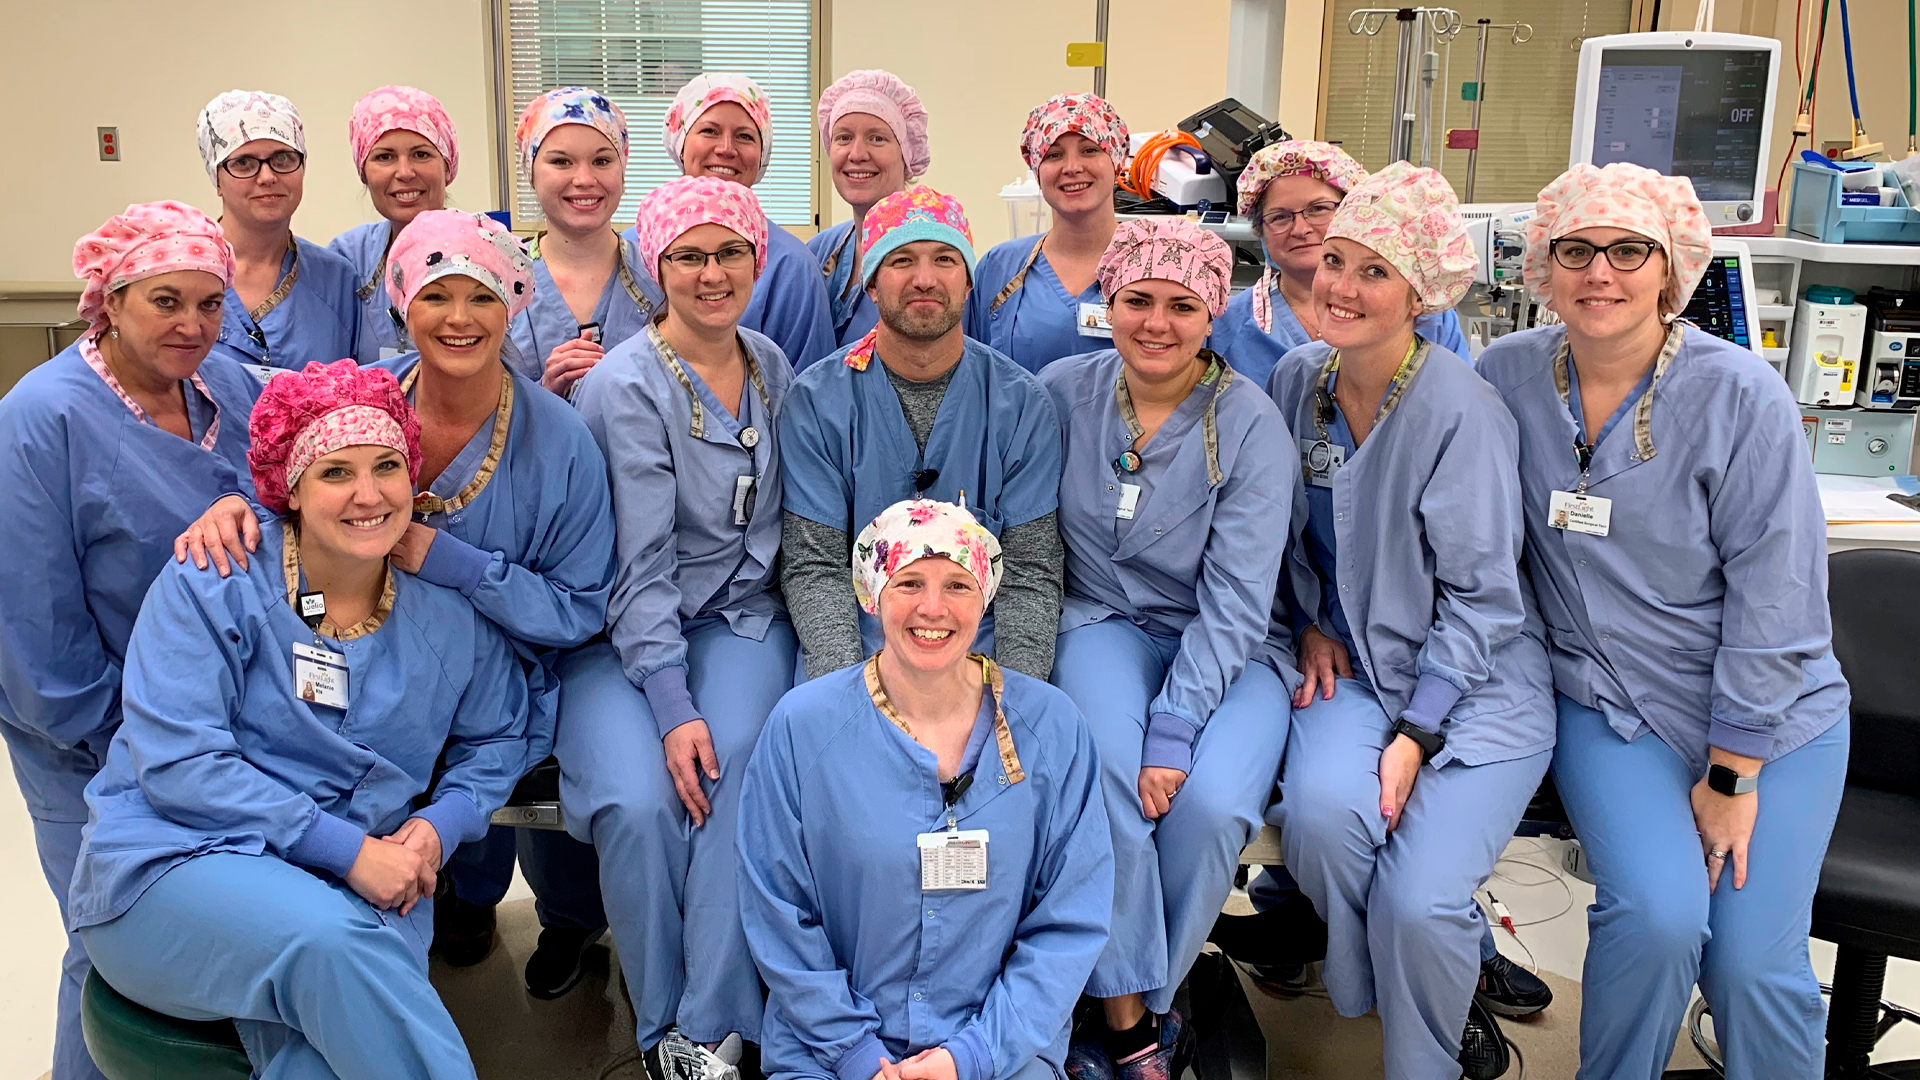 Surgery team in the OR all wearing scrubs and pink scrub hats